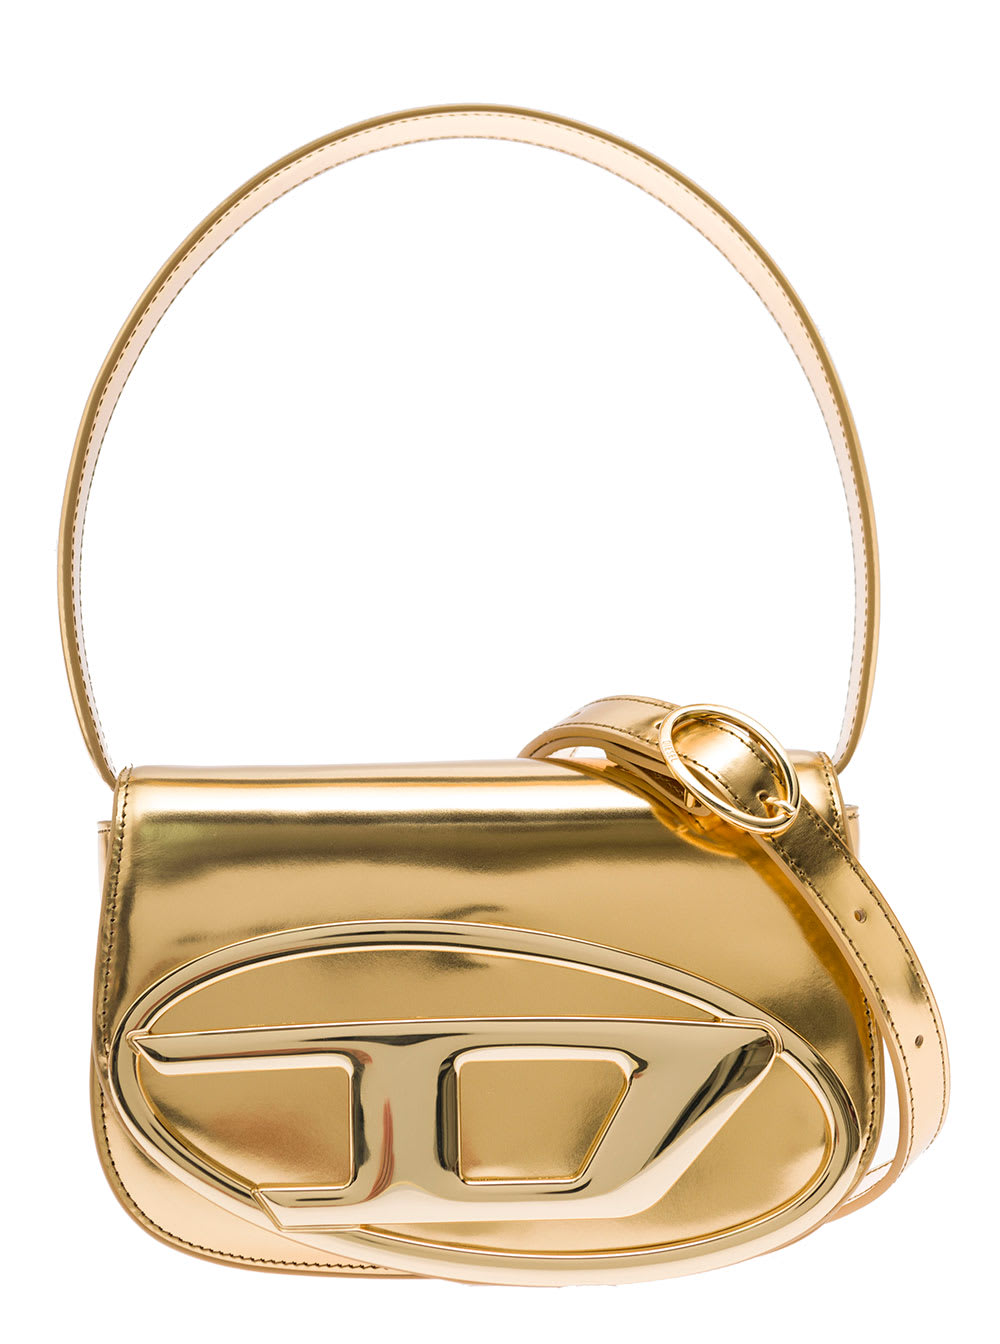 DIESEL 1DR GOLD-COLORED HANDBAG WITH ELECTROPLATED OVAL D PLAQUE IN GLOSSY MIRRORED-LEATHER WOMAN